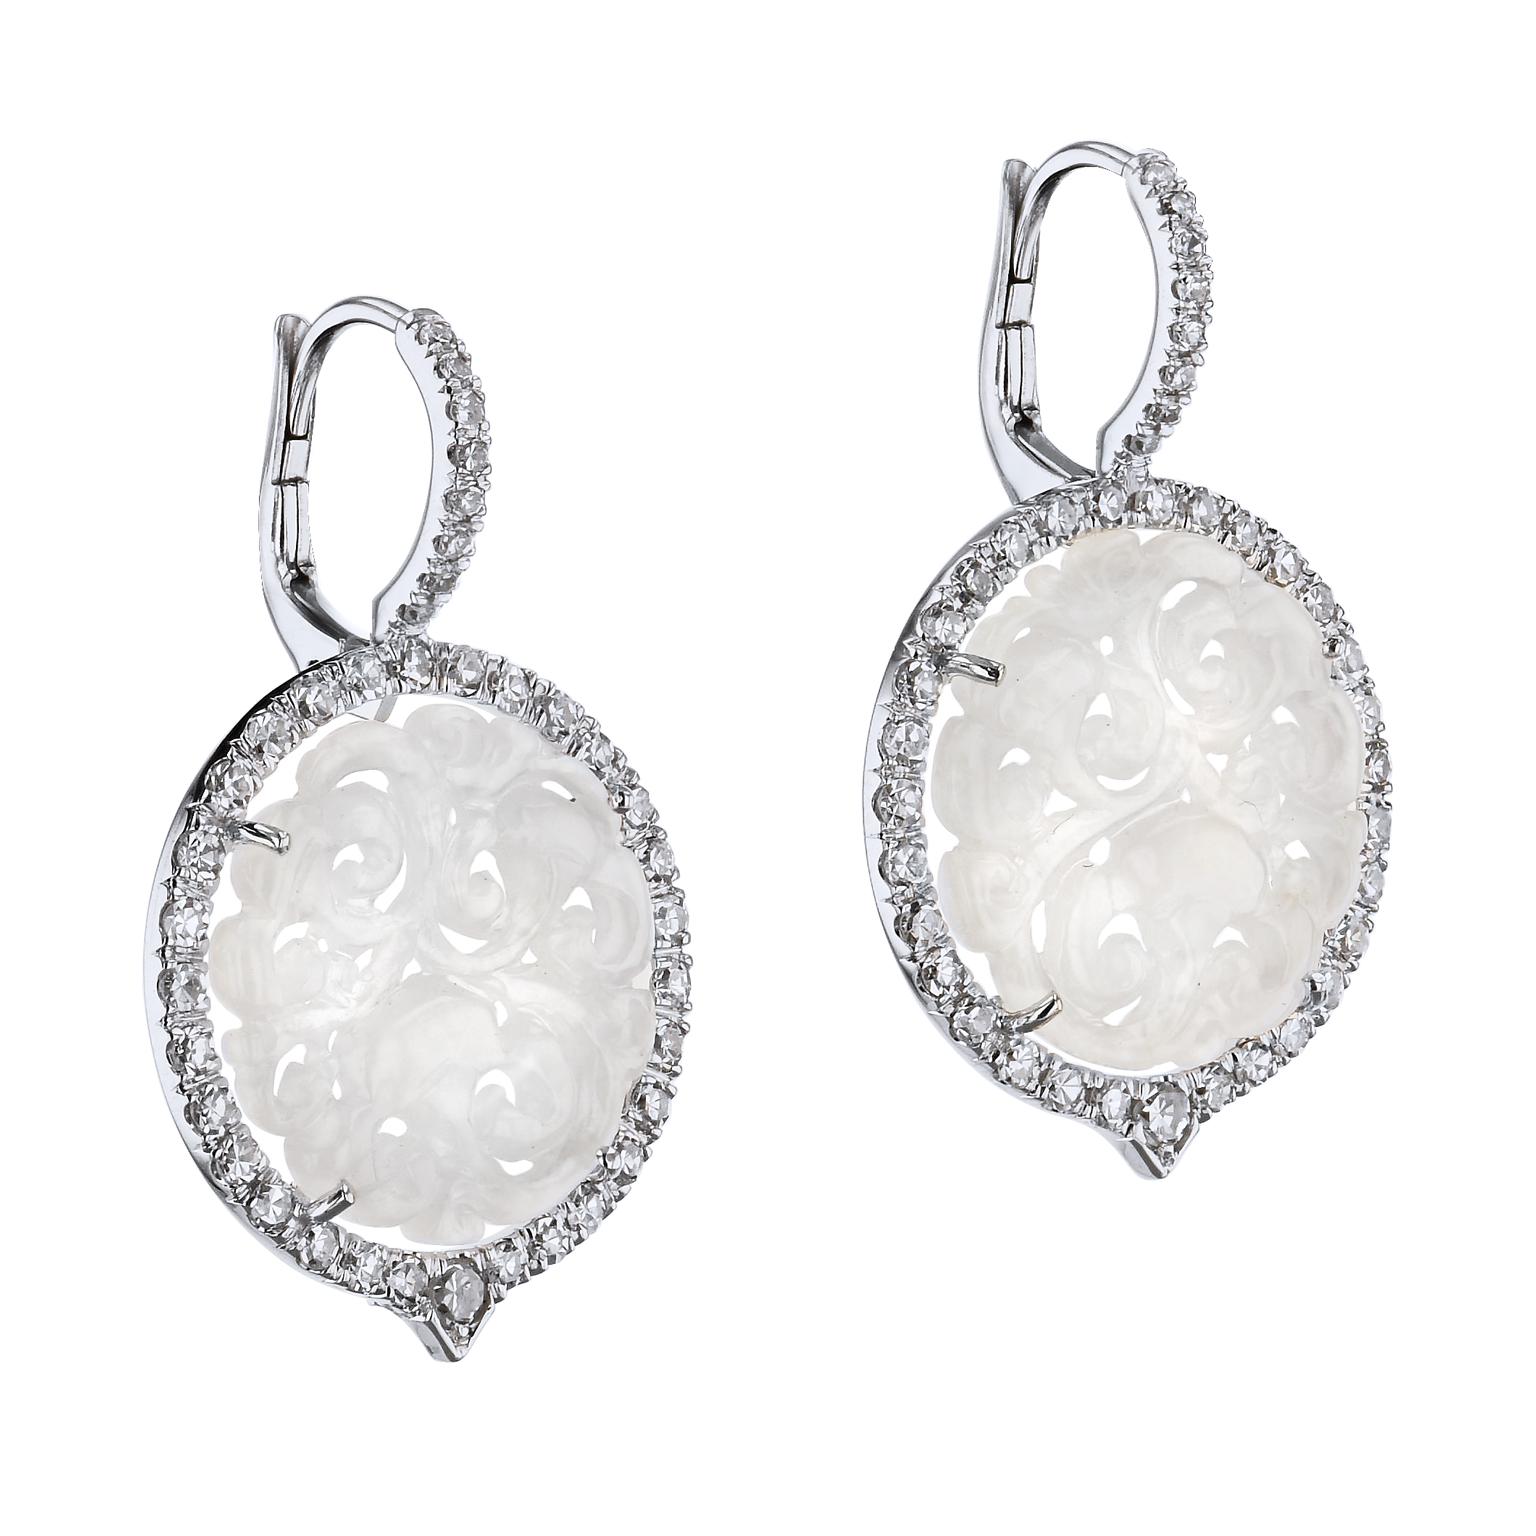 Decorated in 18 karat white gold and pave diamonds of 1.12 carats in total weight (G/H VS), these handmade 17mm Grade A No Treatment Icy Jade earrings are the perfect pieces to brighten your wardrobe.